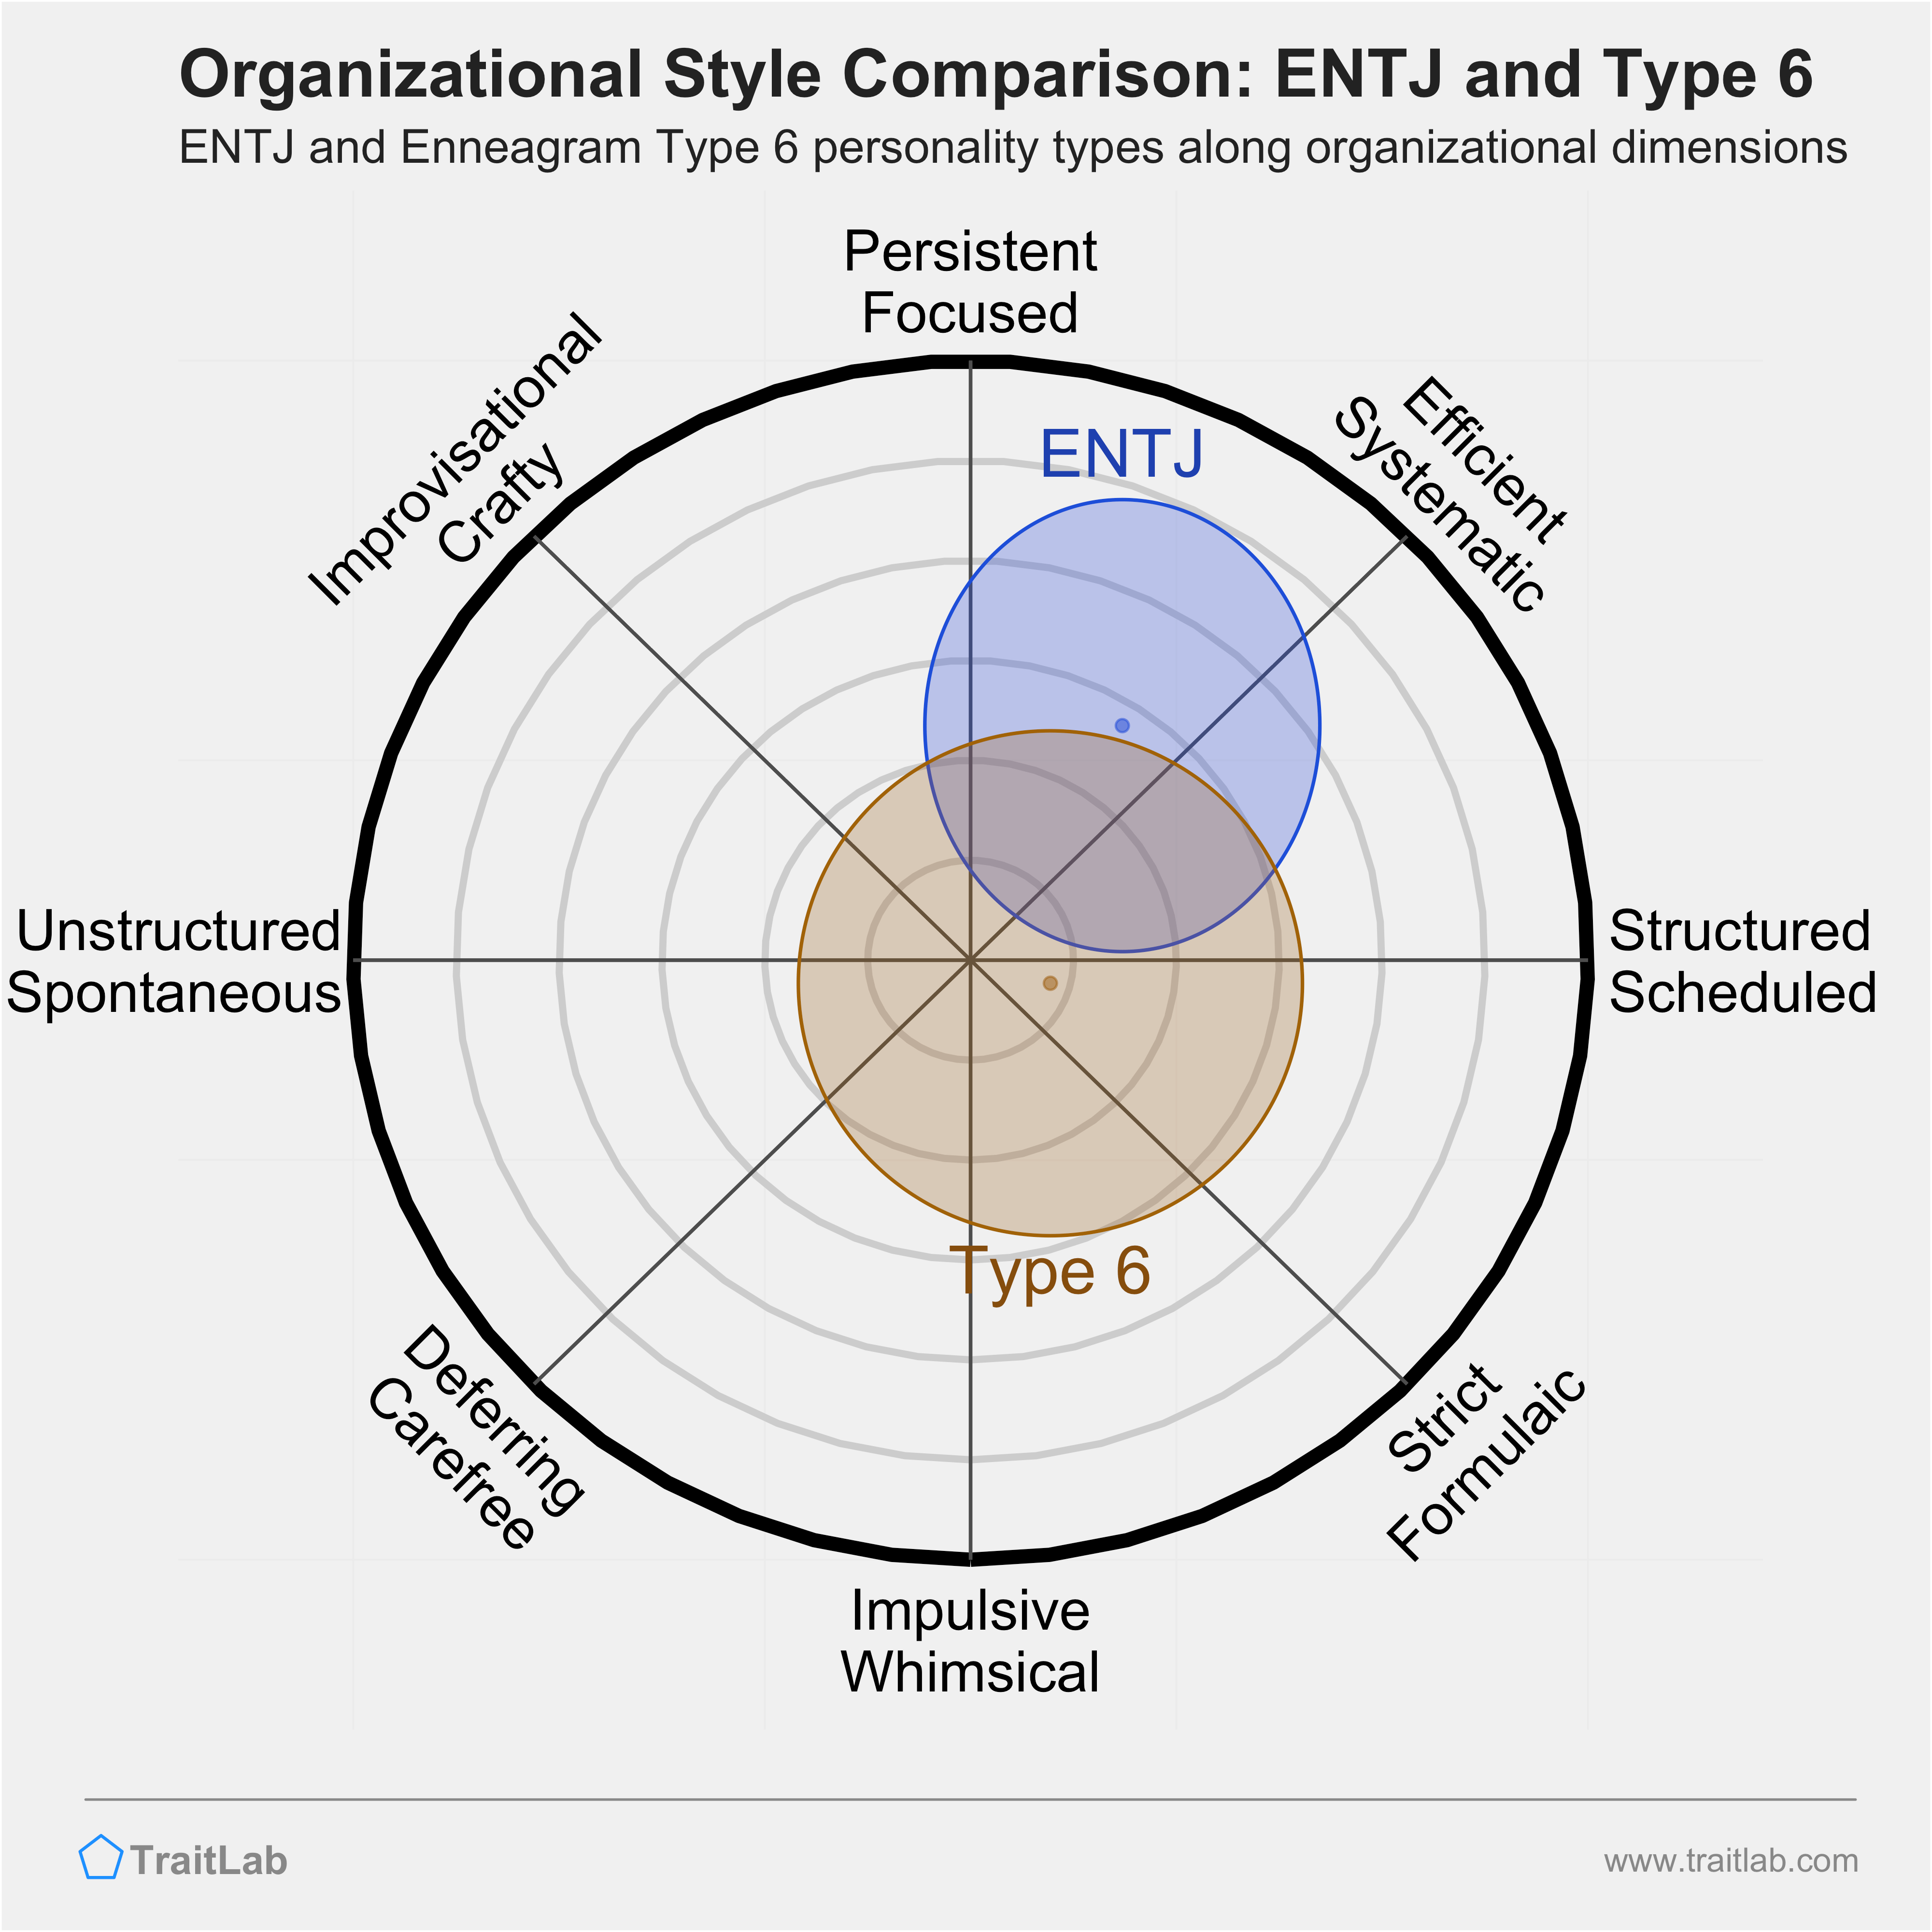 ENTJ and Type 6 comparison across organizational dimensions